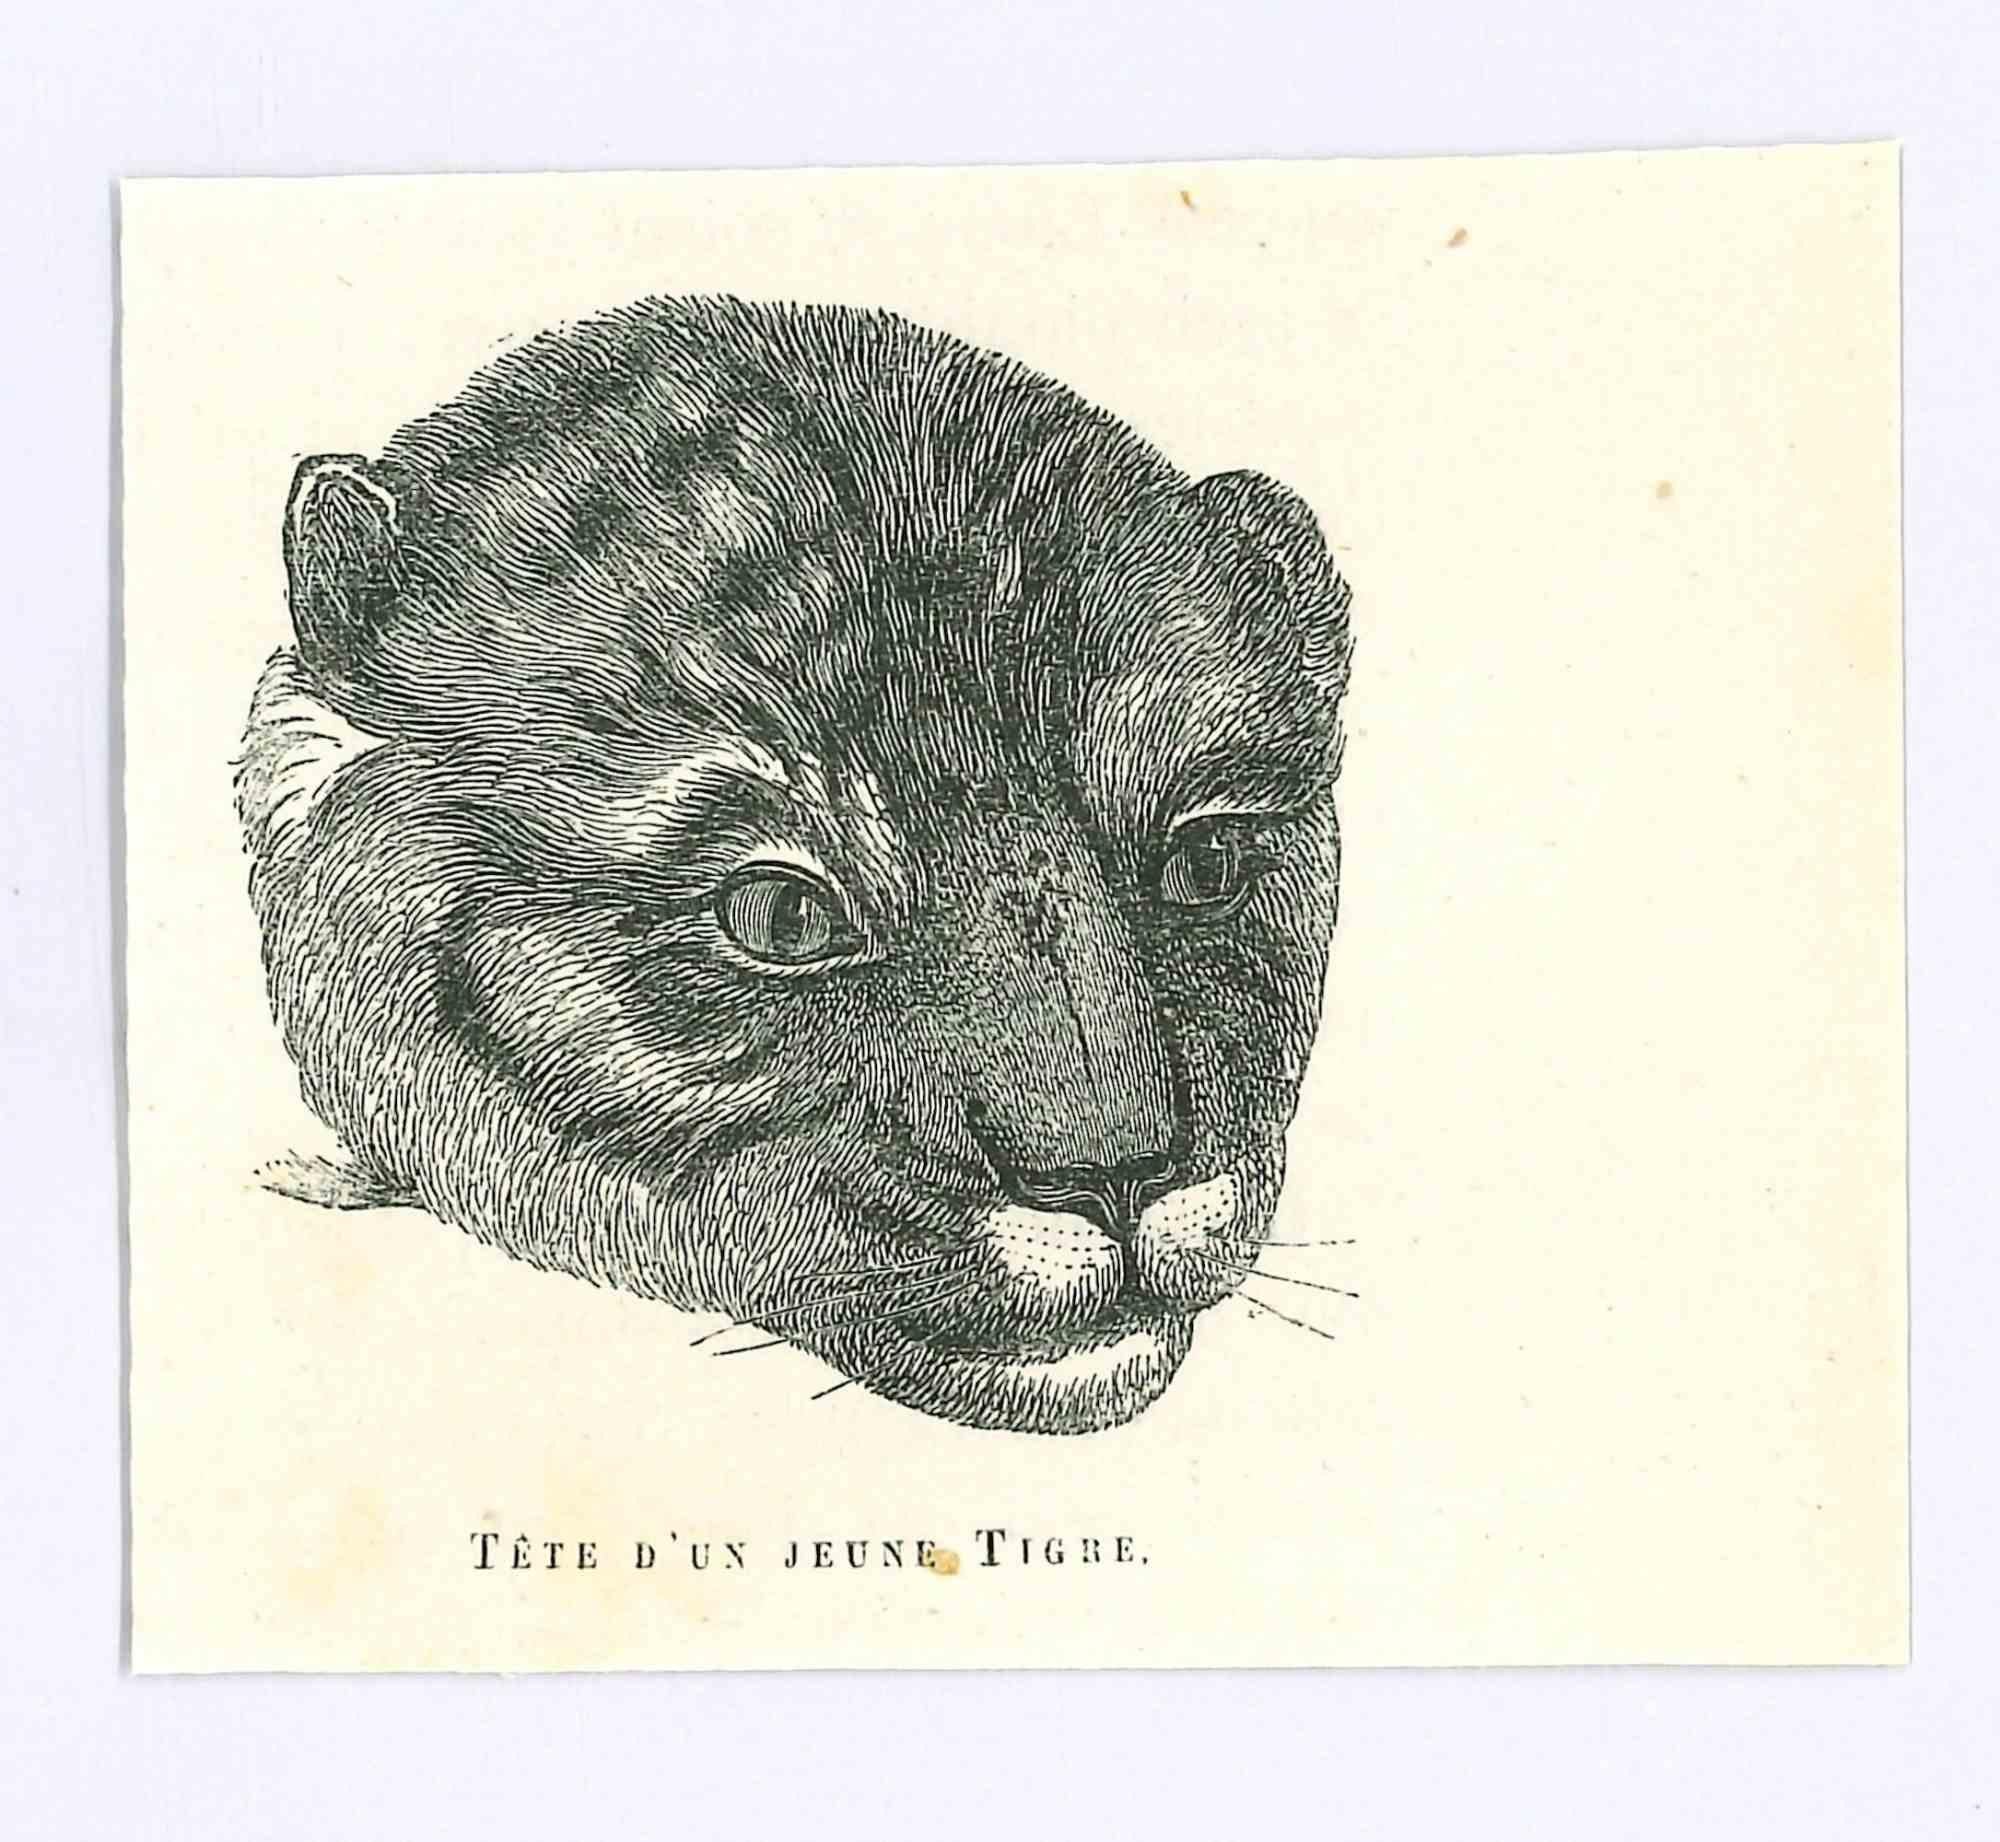 Tigre is an original lithograph on ivory-colored paper, realized by Paul Gervais (1816-1879). The artwork is from The Series of "Les Trois Règnes de la Nature", and was published in 1854.

Good conditions.

Titled on the lower. With the notes on the